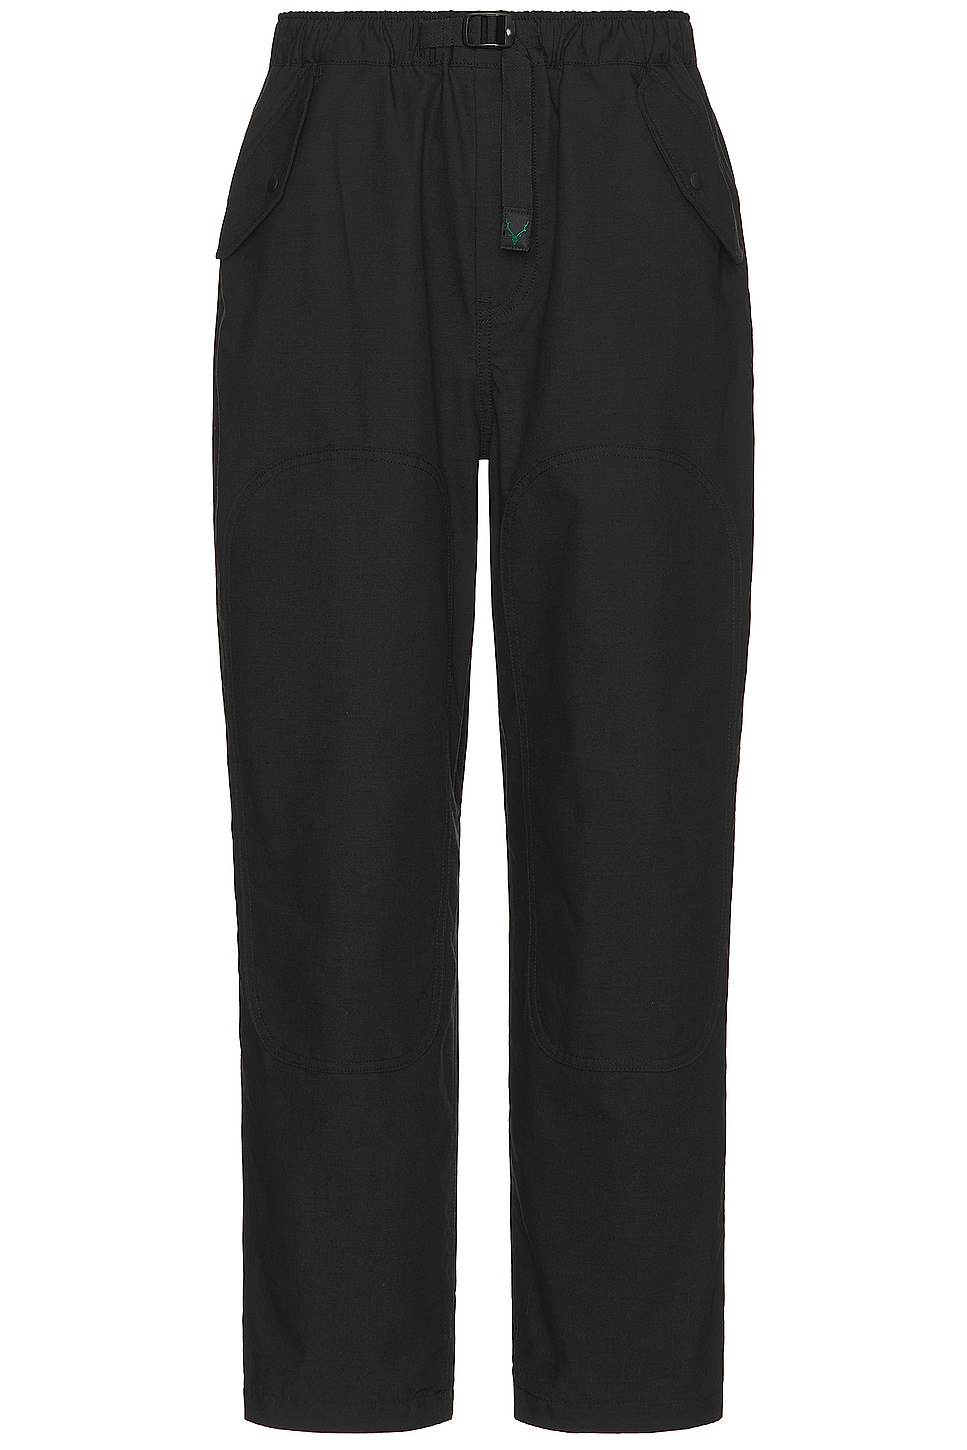 Image 1 of South2 West8 Belted Double Knee Pant Cmo Ripstop in B-Black